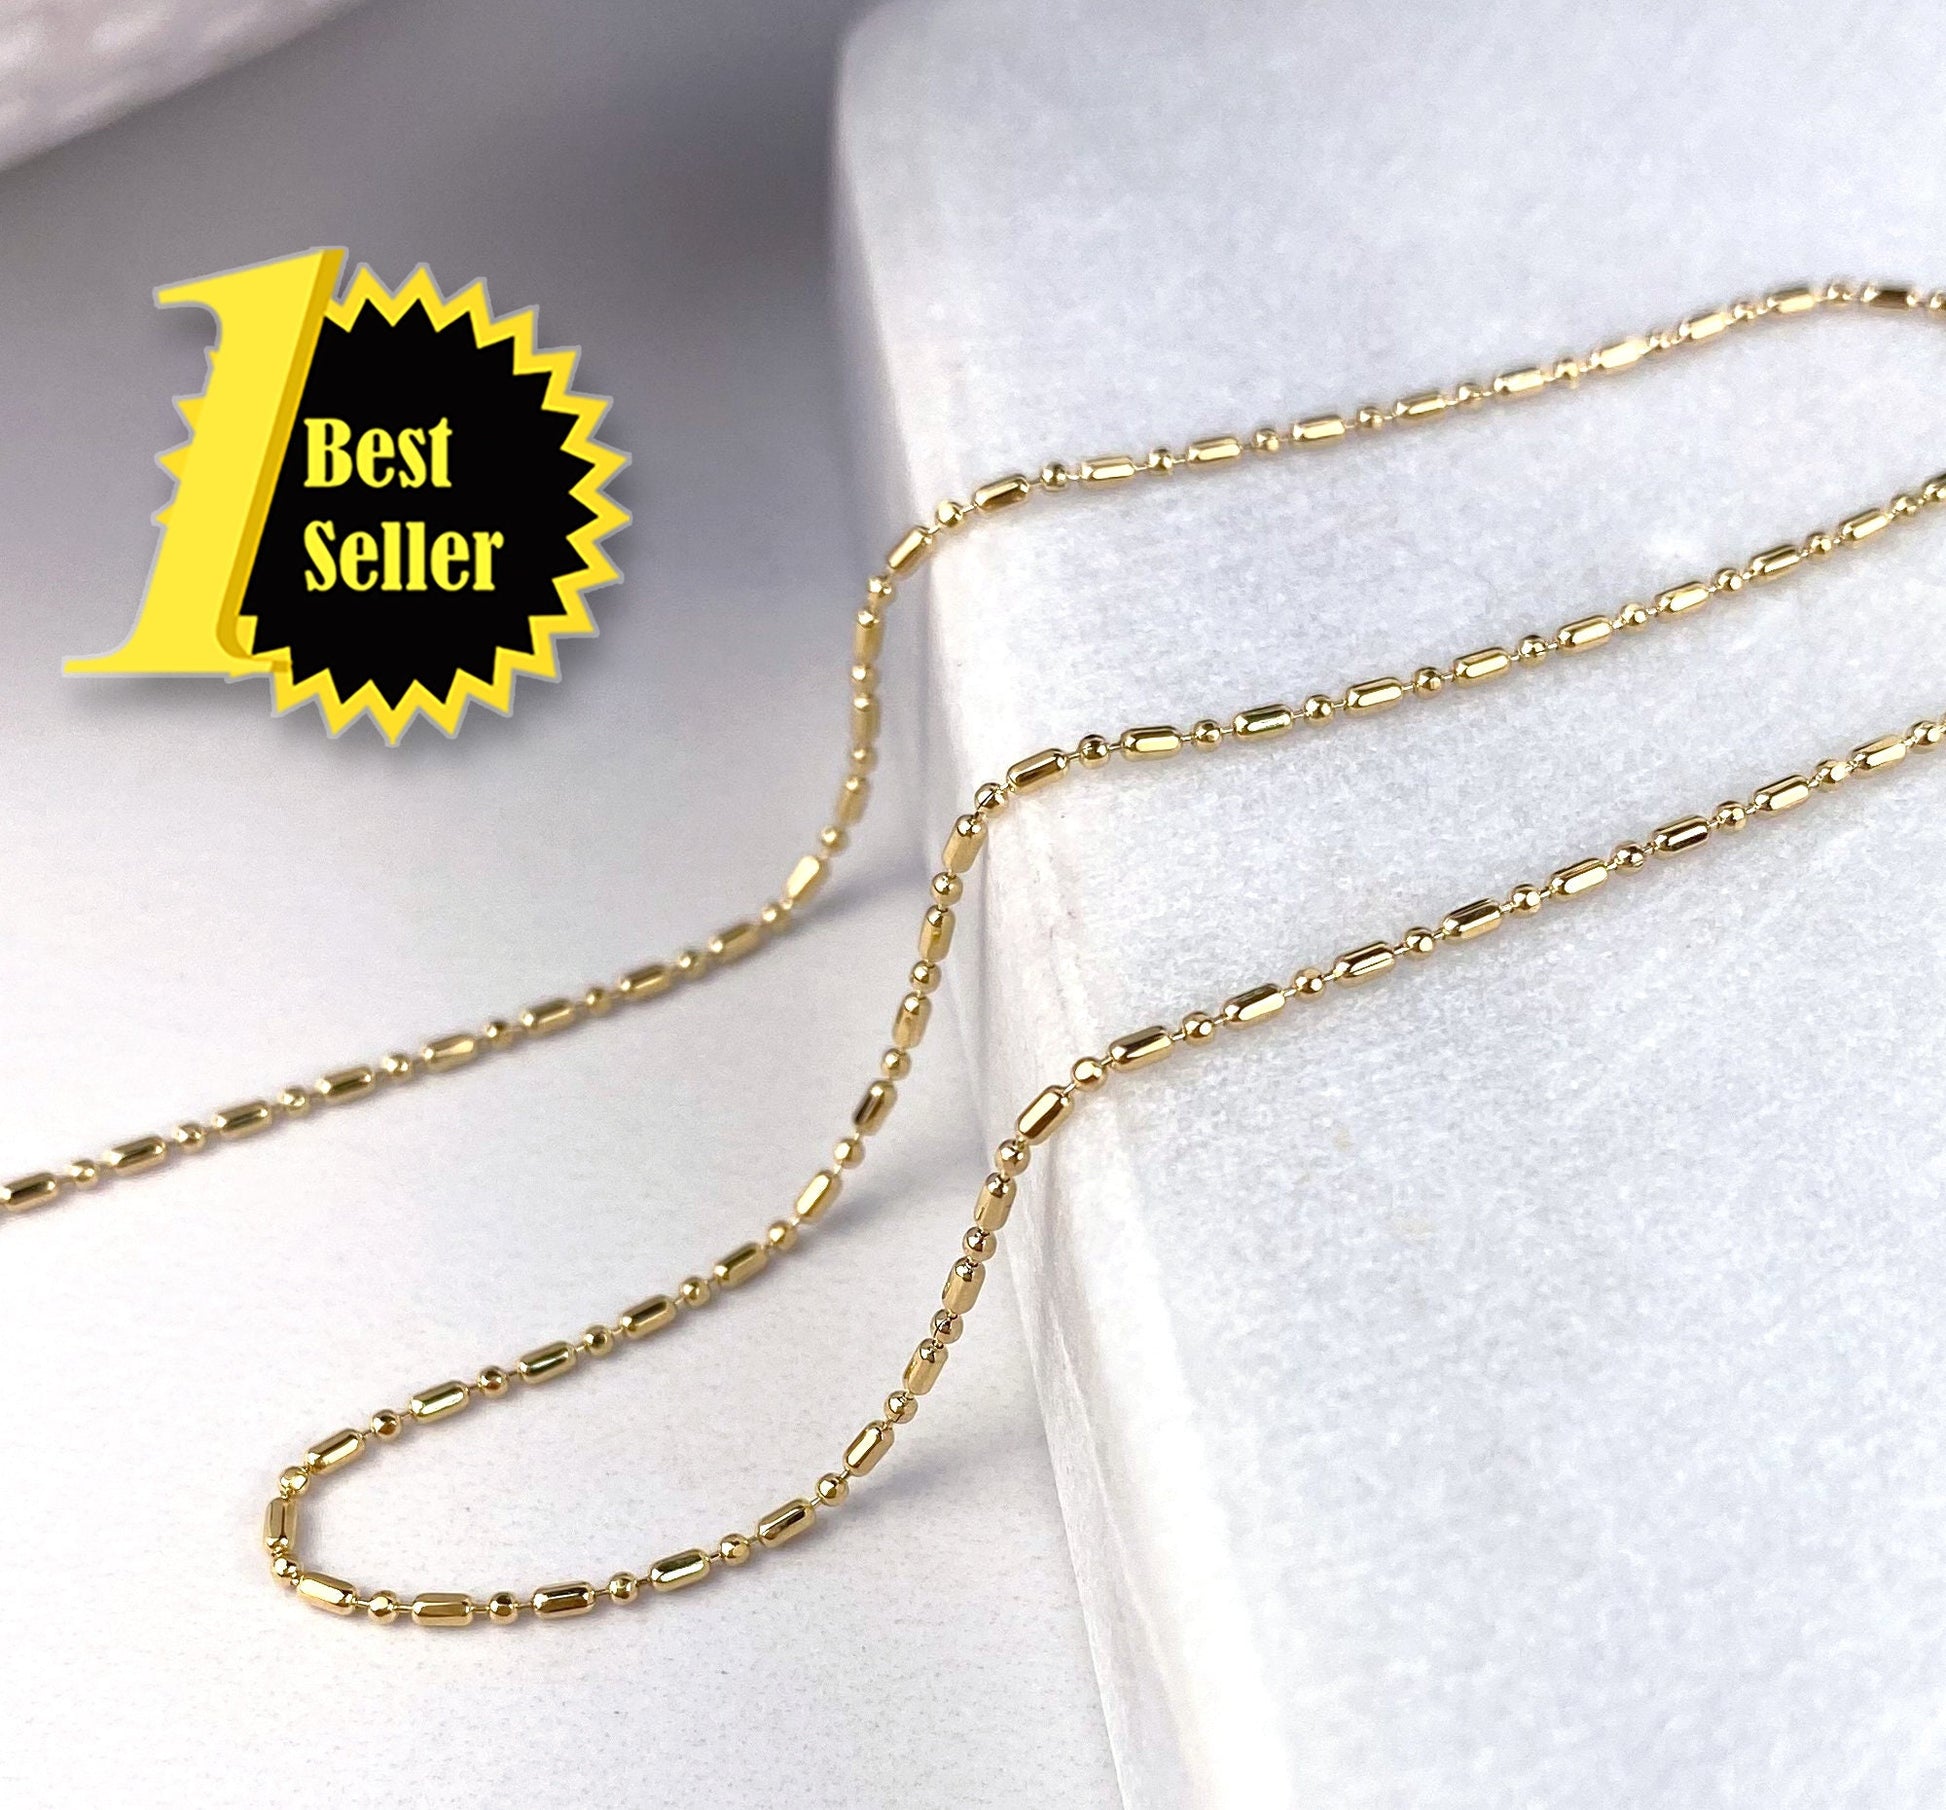 Chains Jewelry Making Wholesale  Necklace Chains Jewelry Making